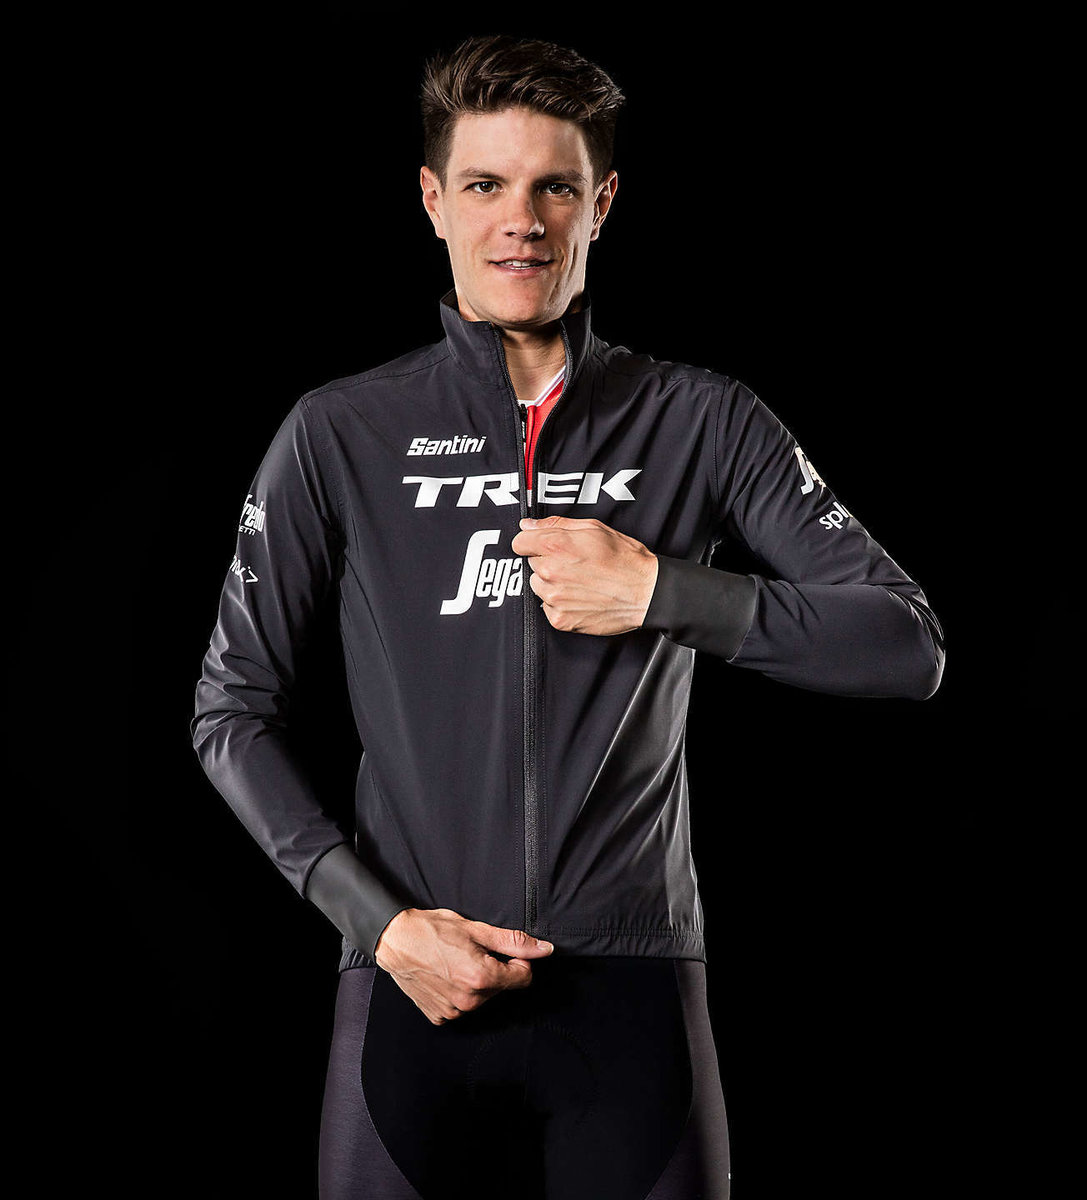 Men's Cycling Jackets: Ride in Comfort and Style – Altura